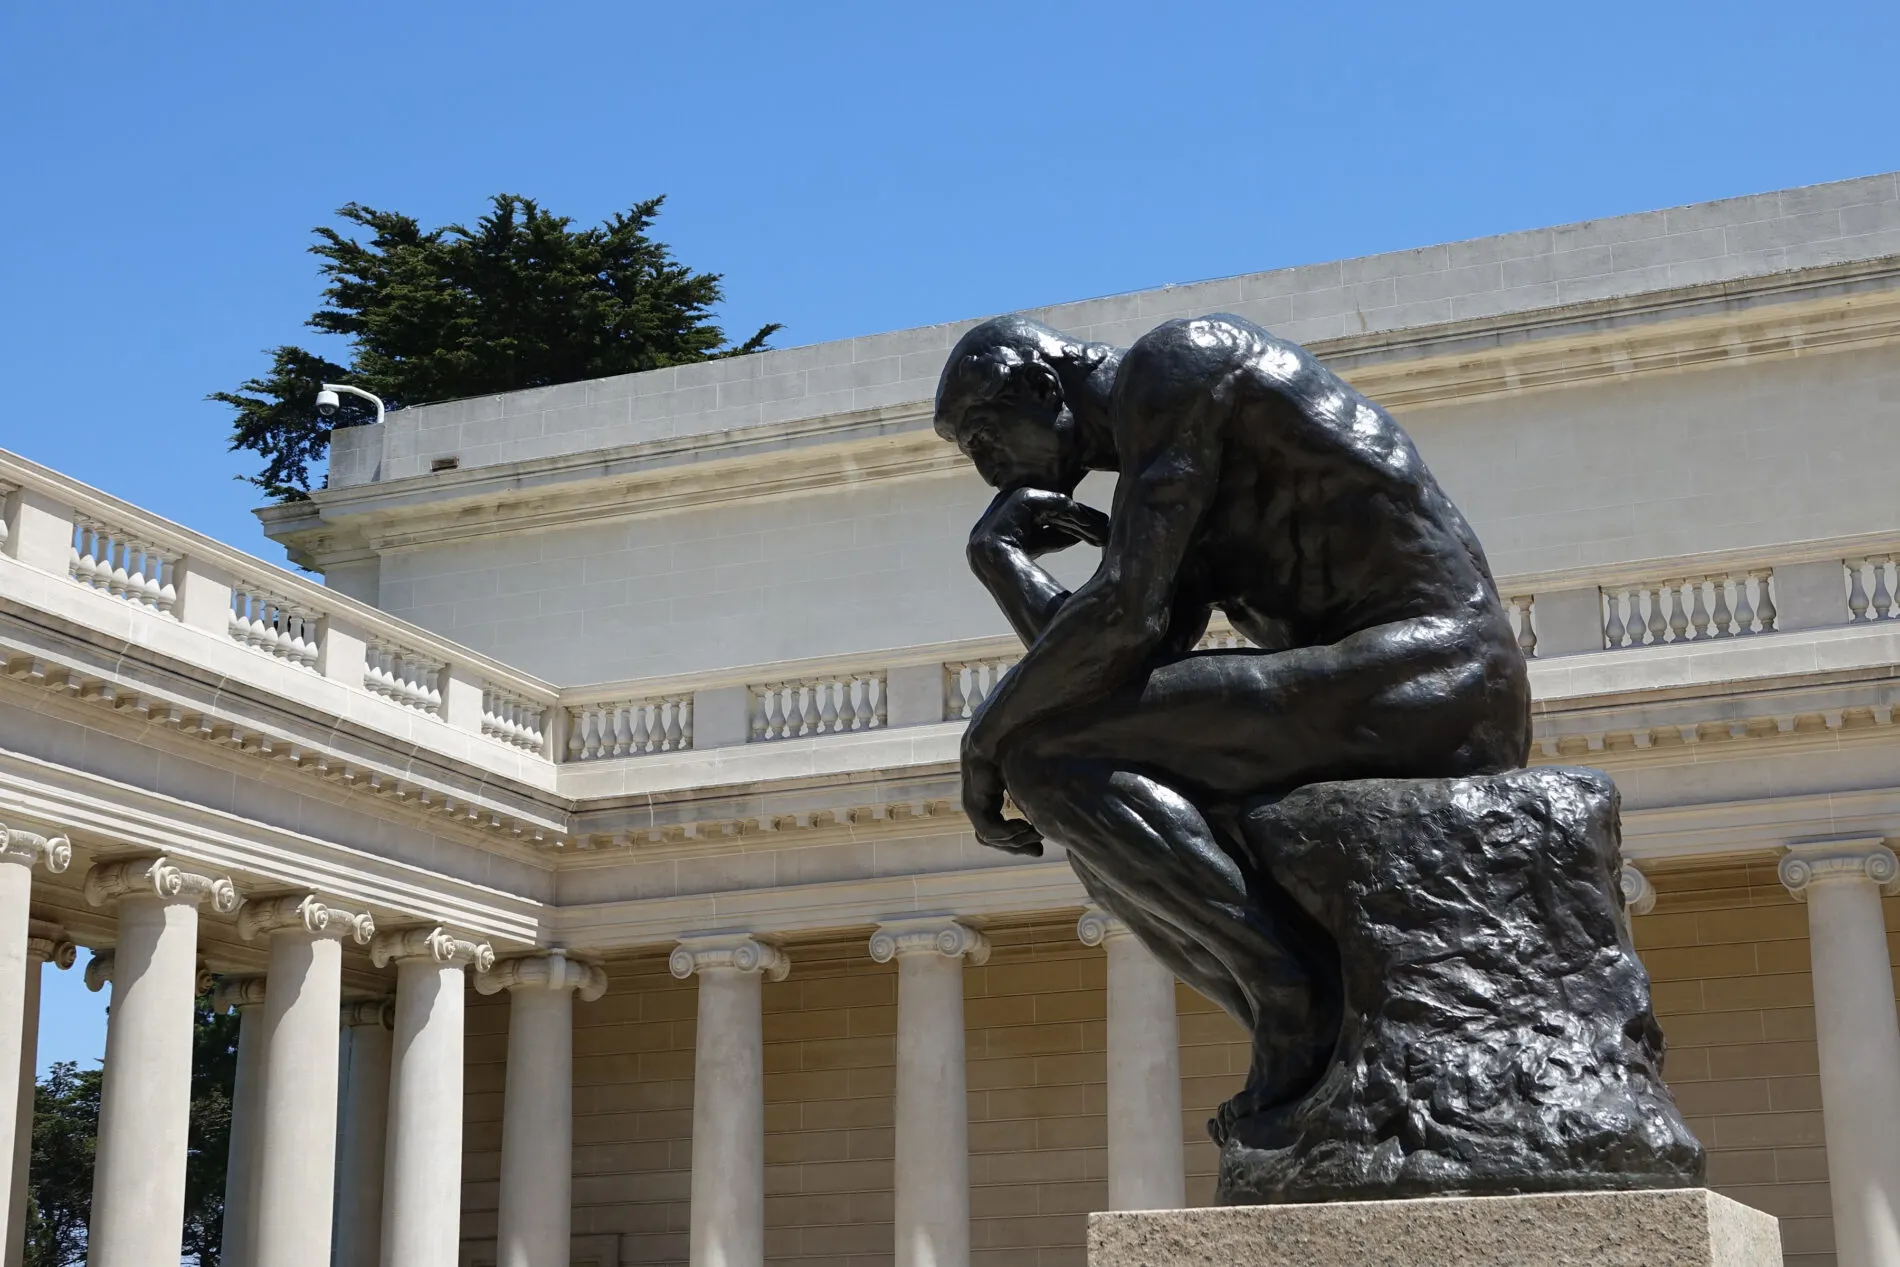 Rodin’s sculpture “The Thinker” in the Legion of Honor Museum courtyard in San Francisco.